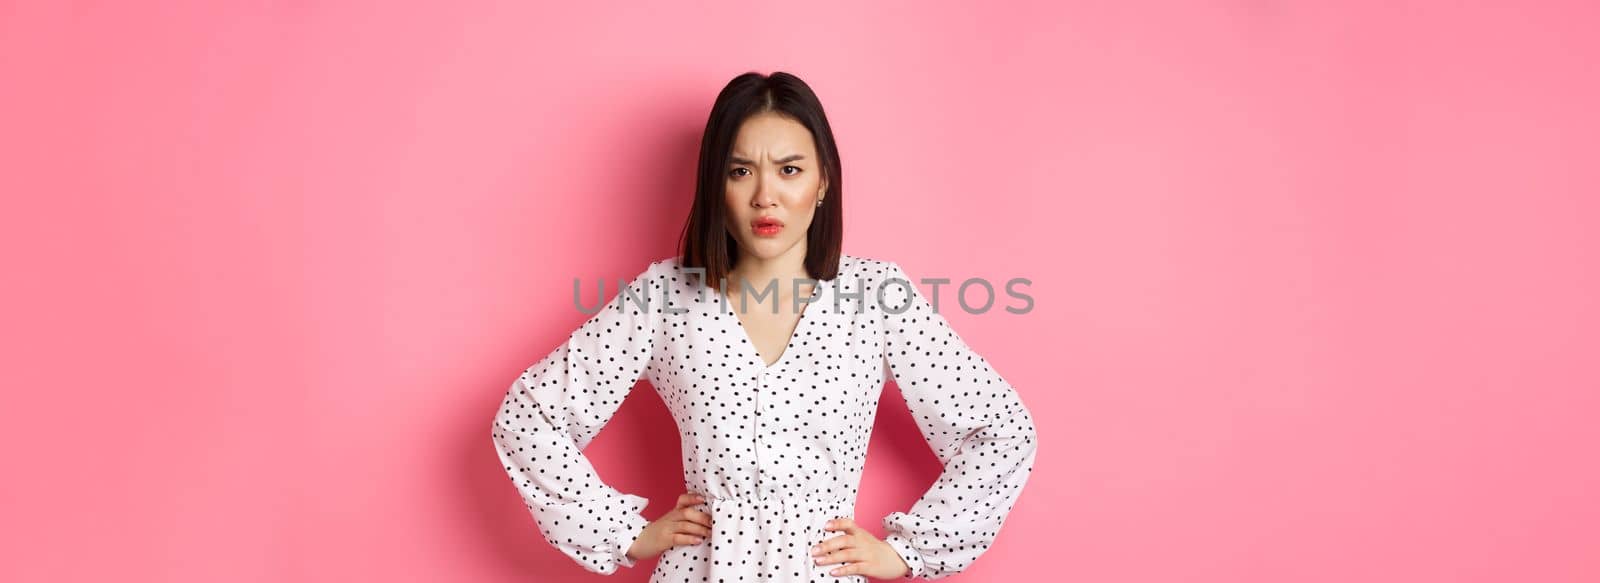 Angry asian woman staring at camera frustrated, holding hands on waist and waiting for explanations, standing in dress against pink background.